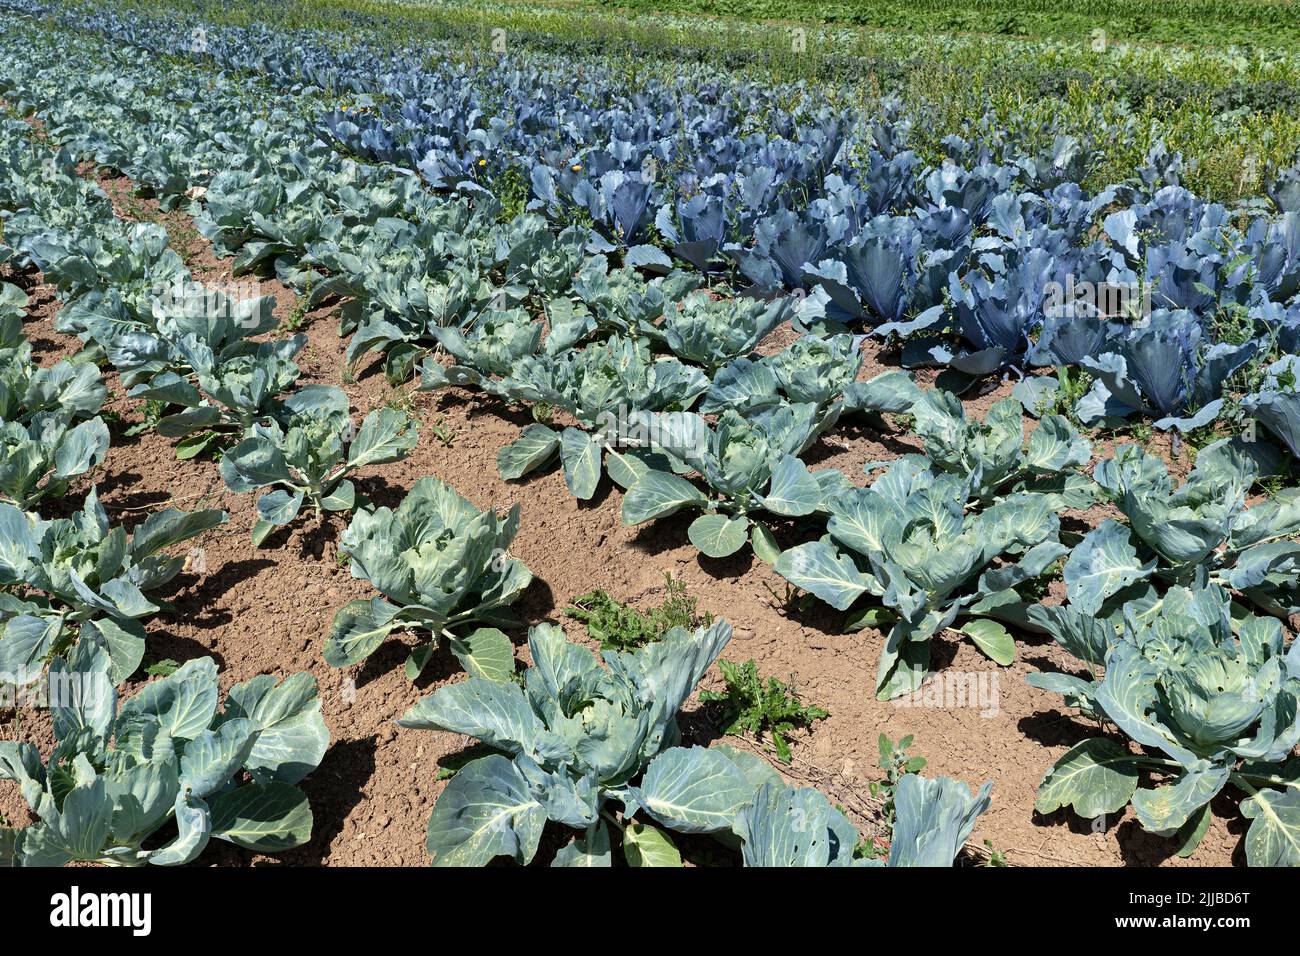 Rows of cauliflower and red cabbage plants in a small field Stock Photo